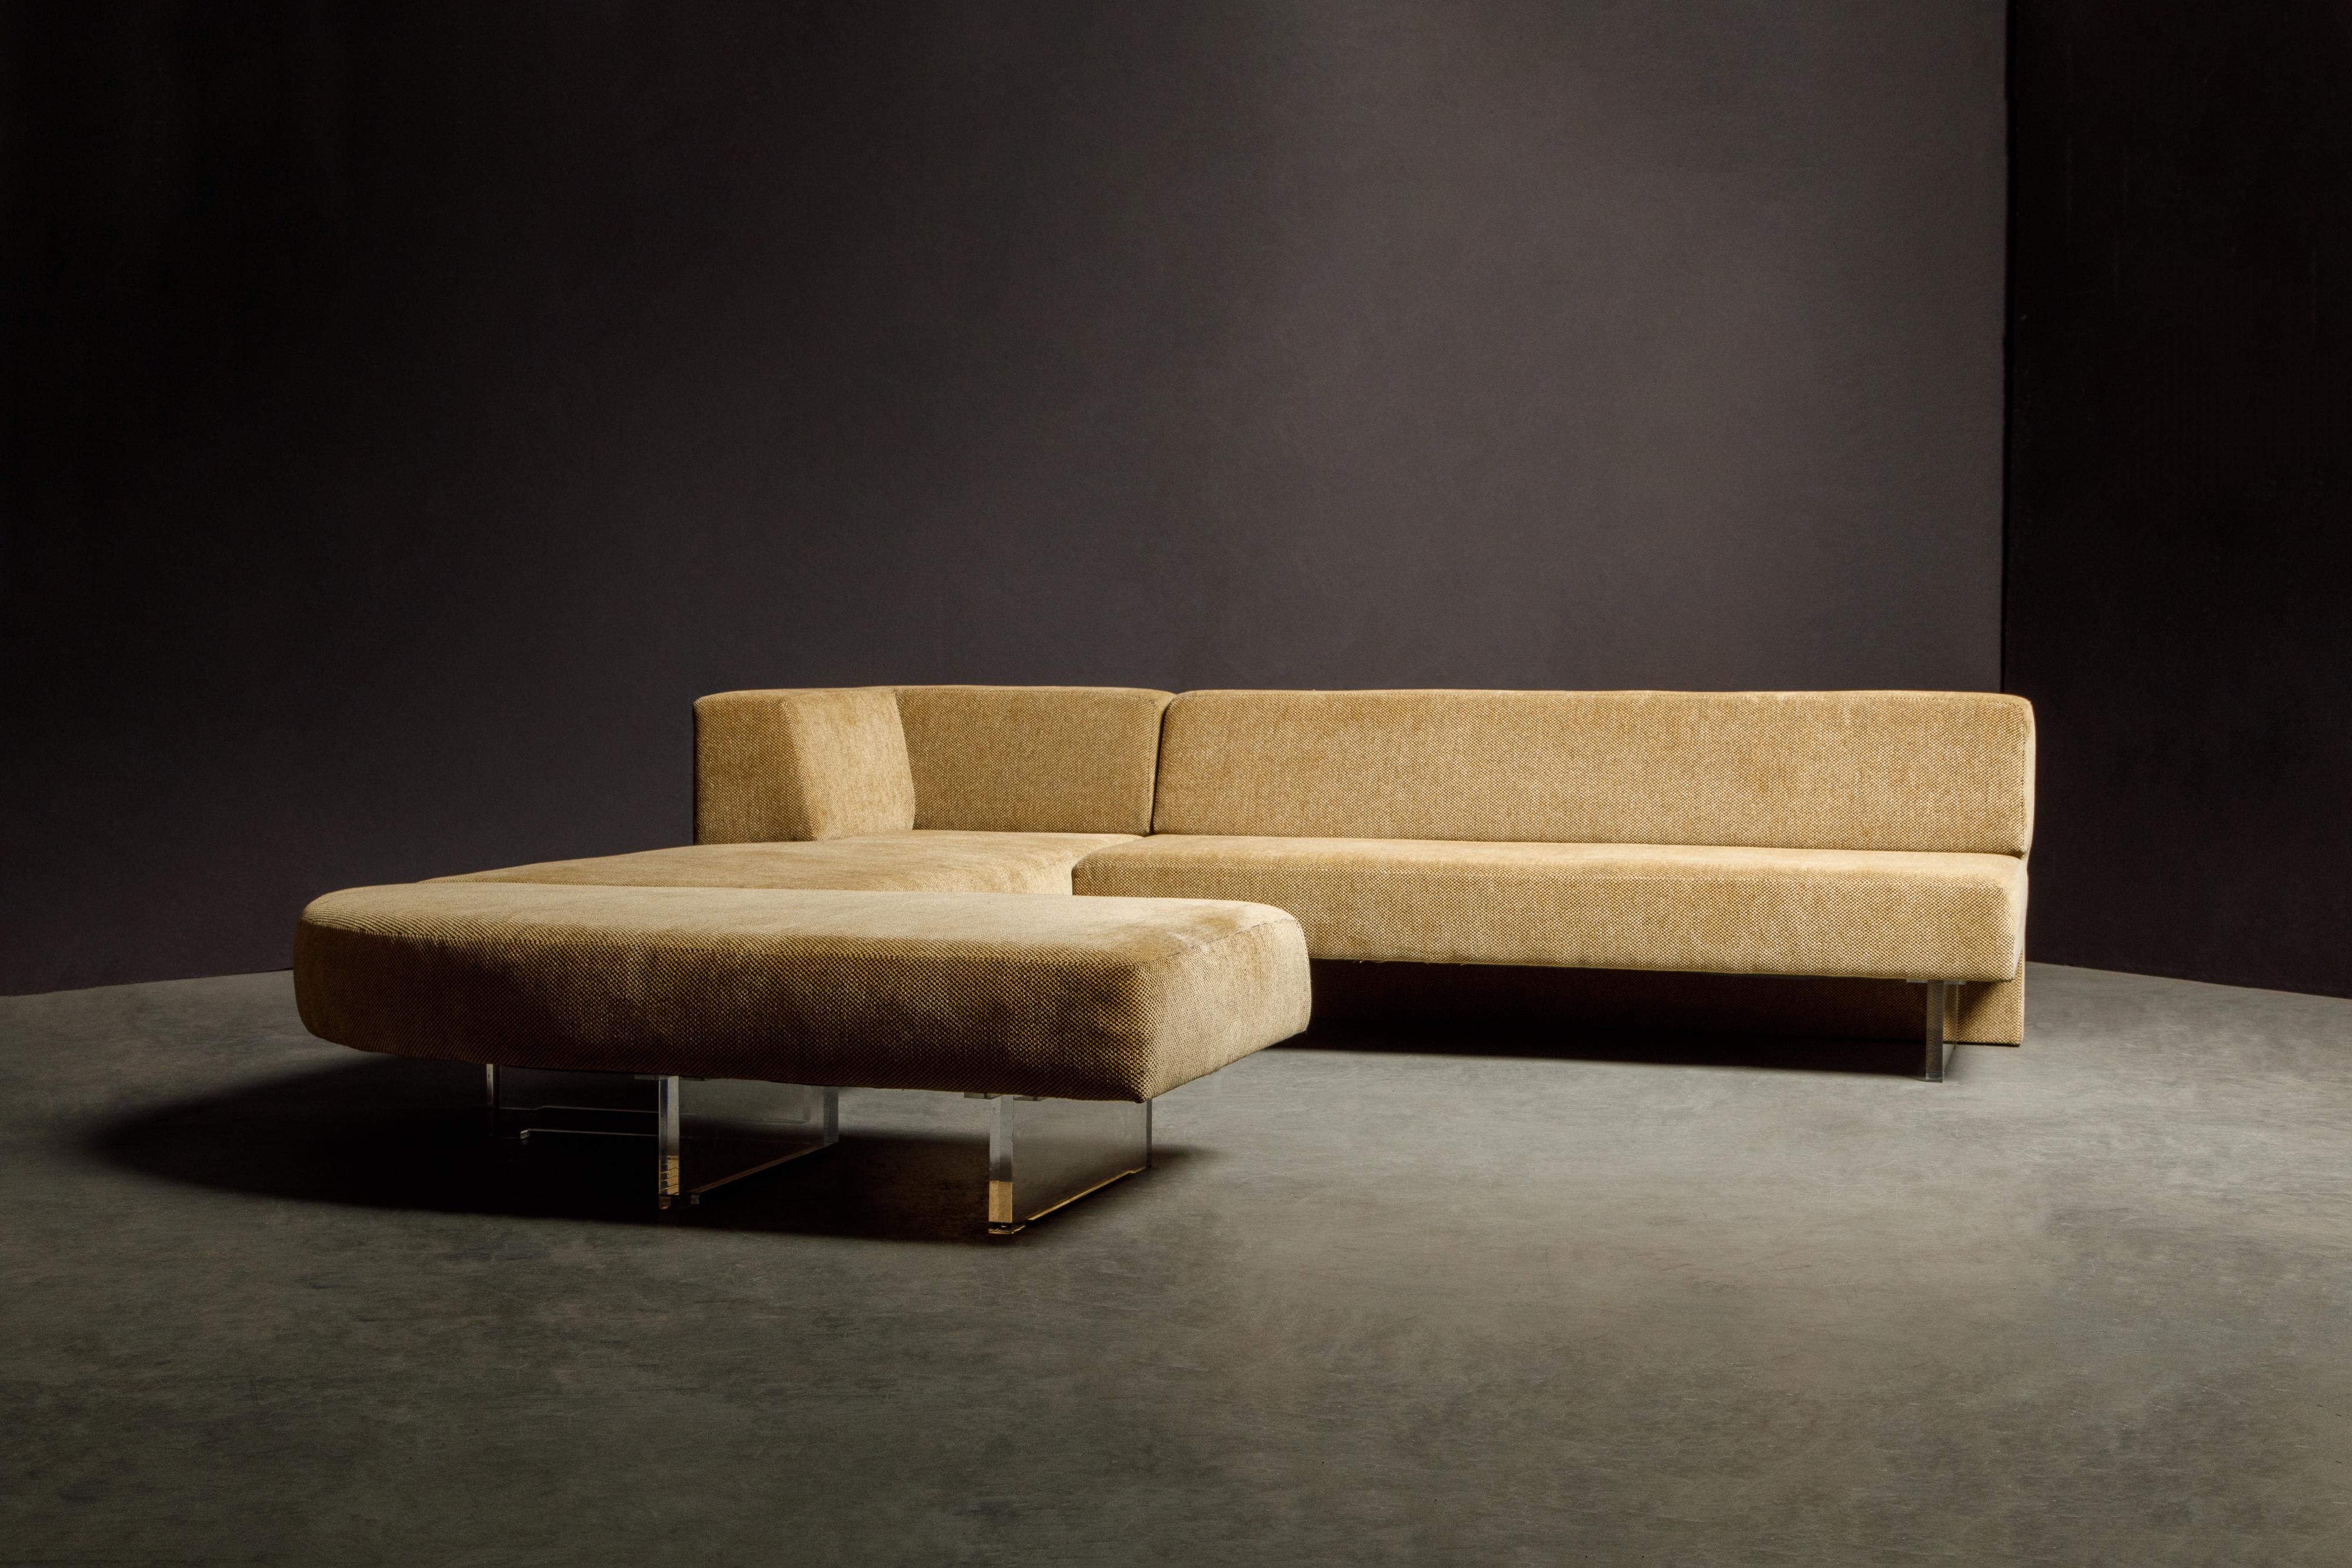 This incredible sectional sofa is by Vladimir Kagan, called the 'Omnibus' seating system. Designed in the 1960s, the Omnibus has remained as one of the most prolific and unique sectional sofa designs spanning all decades since, celebrated by modern